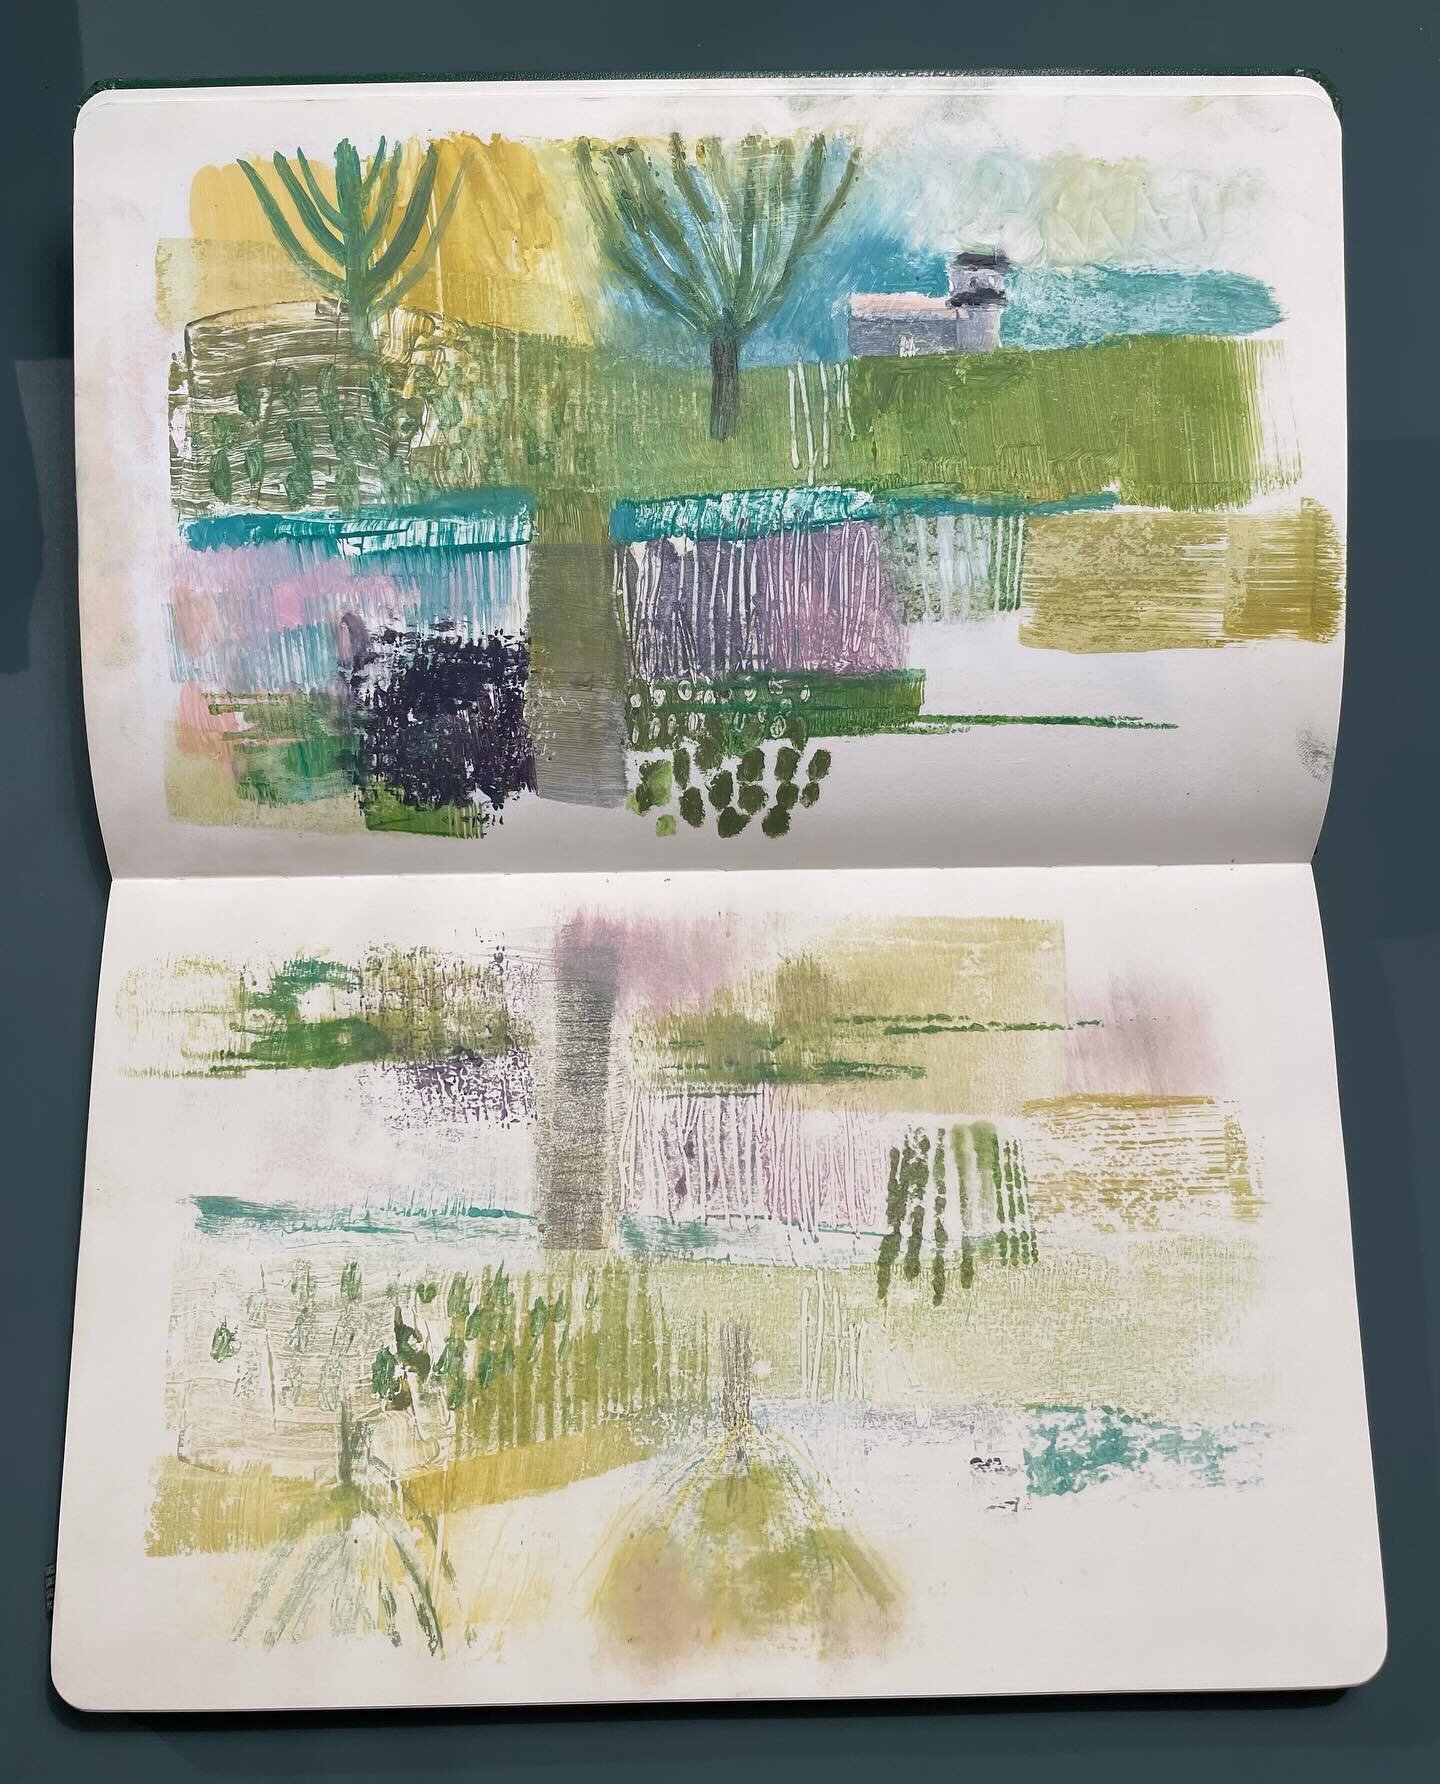 Today&rsquo;s post: landscape impressions. Using this fun &ldquo;mock printing method&rdquo; today. 
#landscape #landscapeimpressionism #sketchbookplay #sketchbook #printing #oilpaintsketch